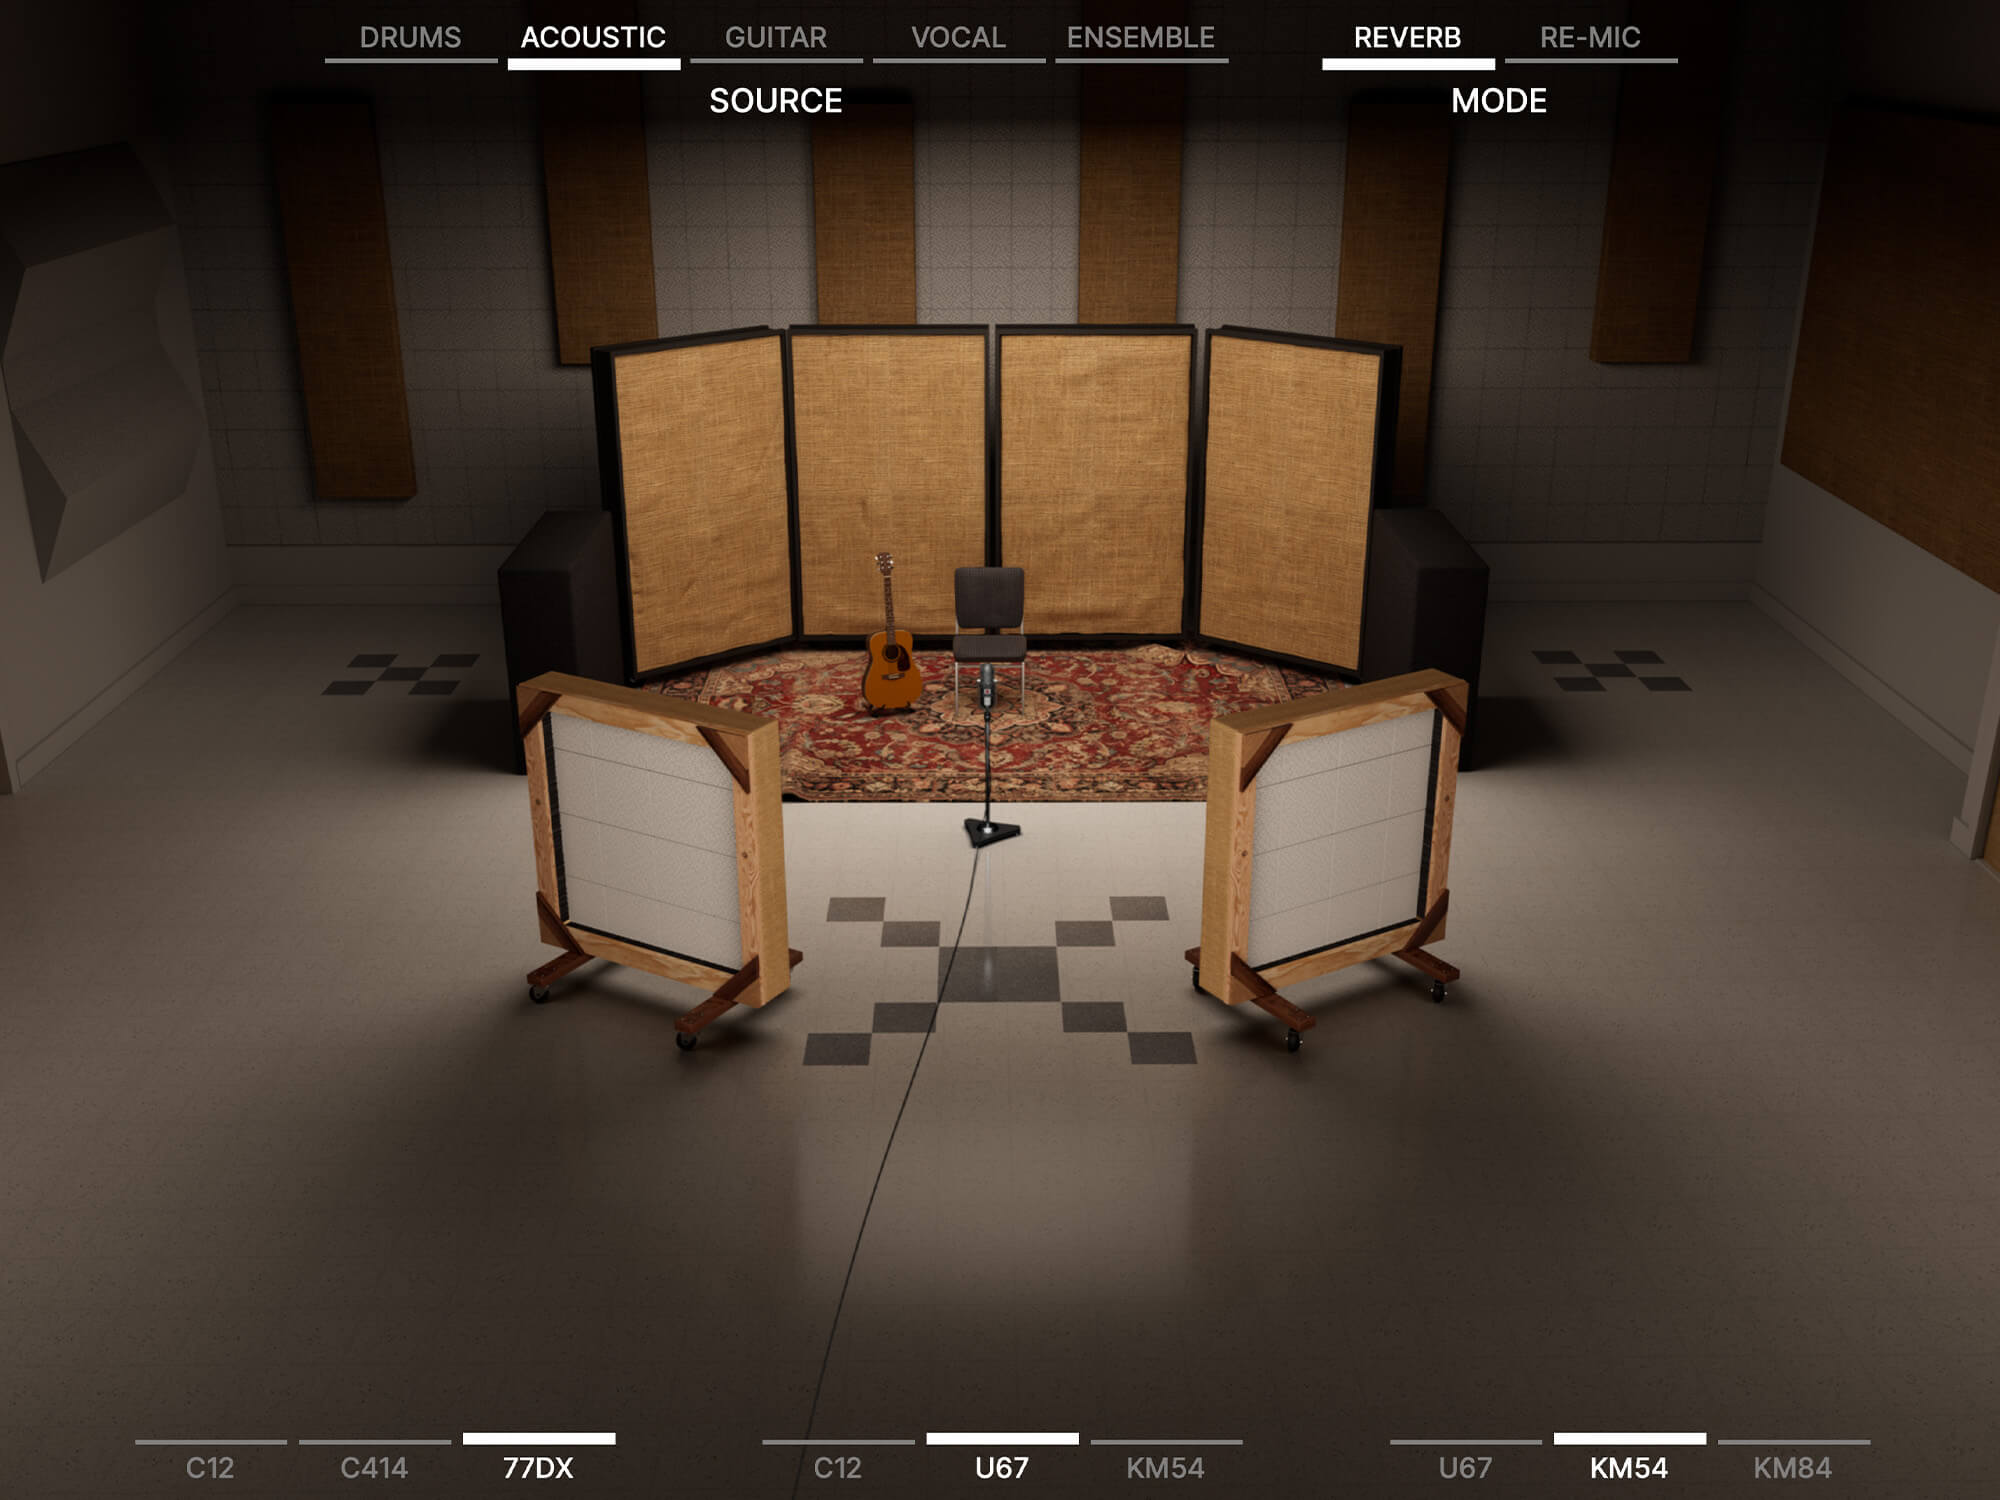 Universal Audio Sound City Plugin which shows a digital recreation of a room. In it there's an acoustic guitar and a stool.